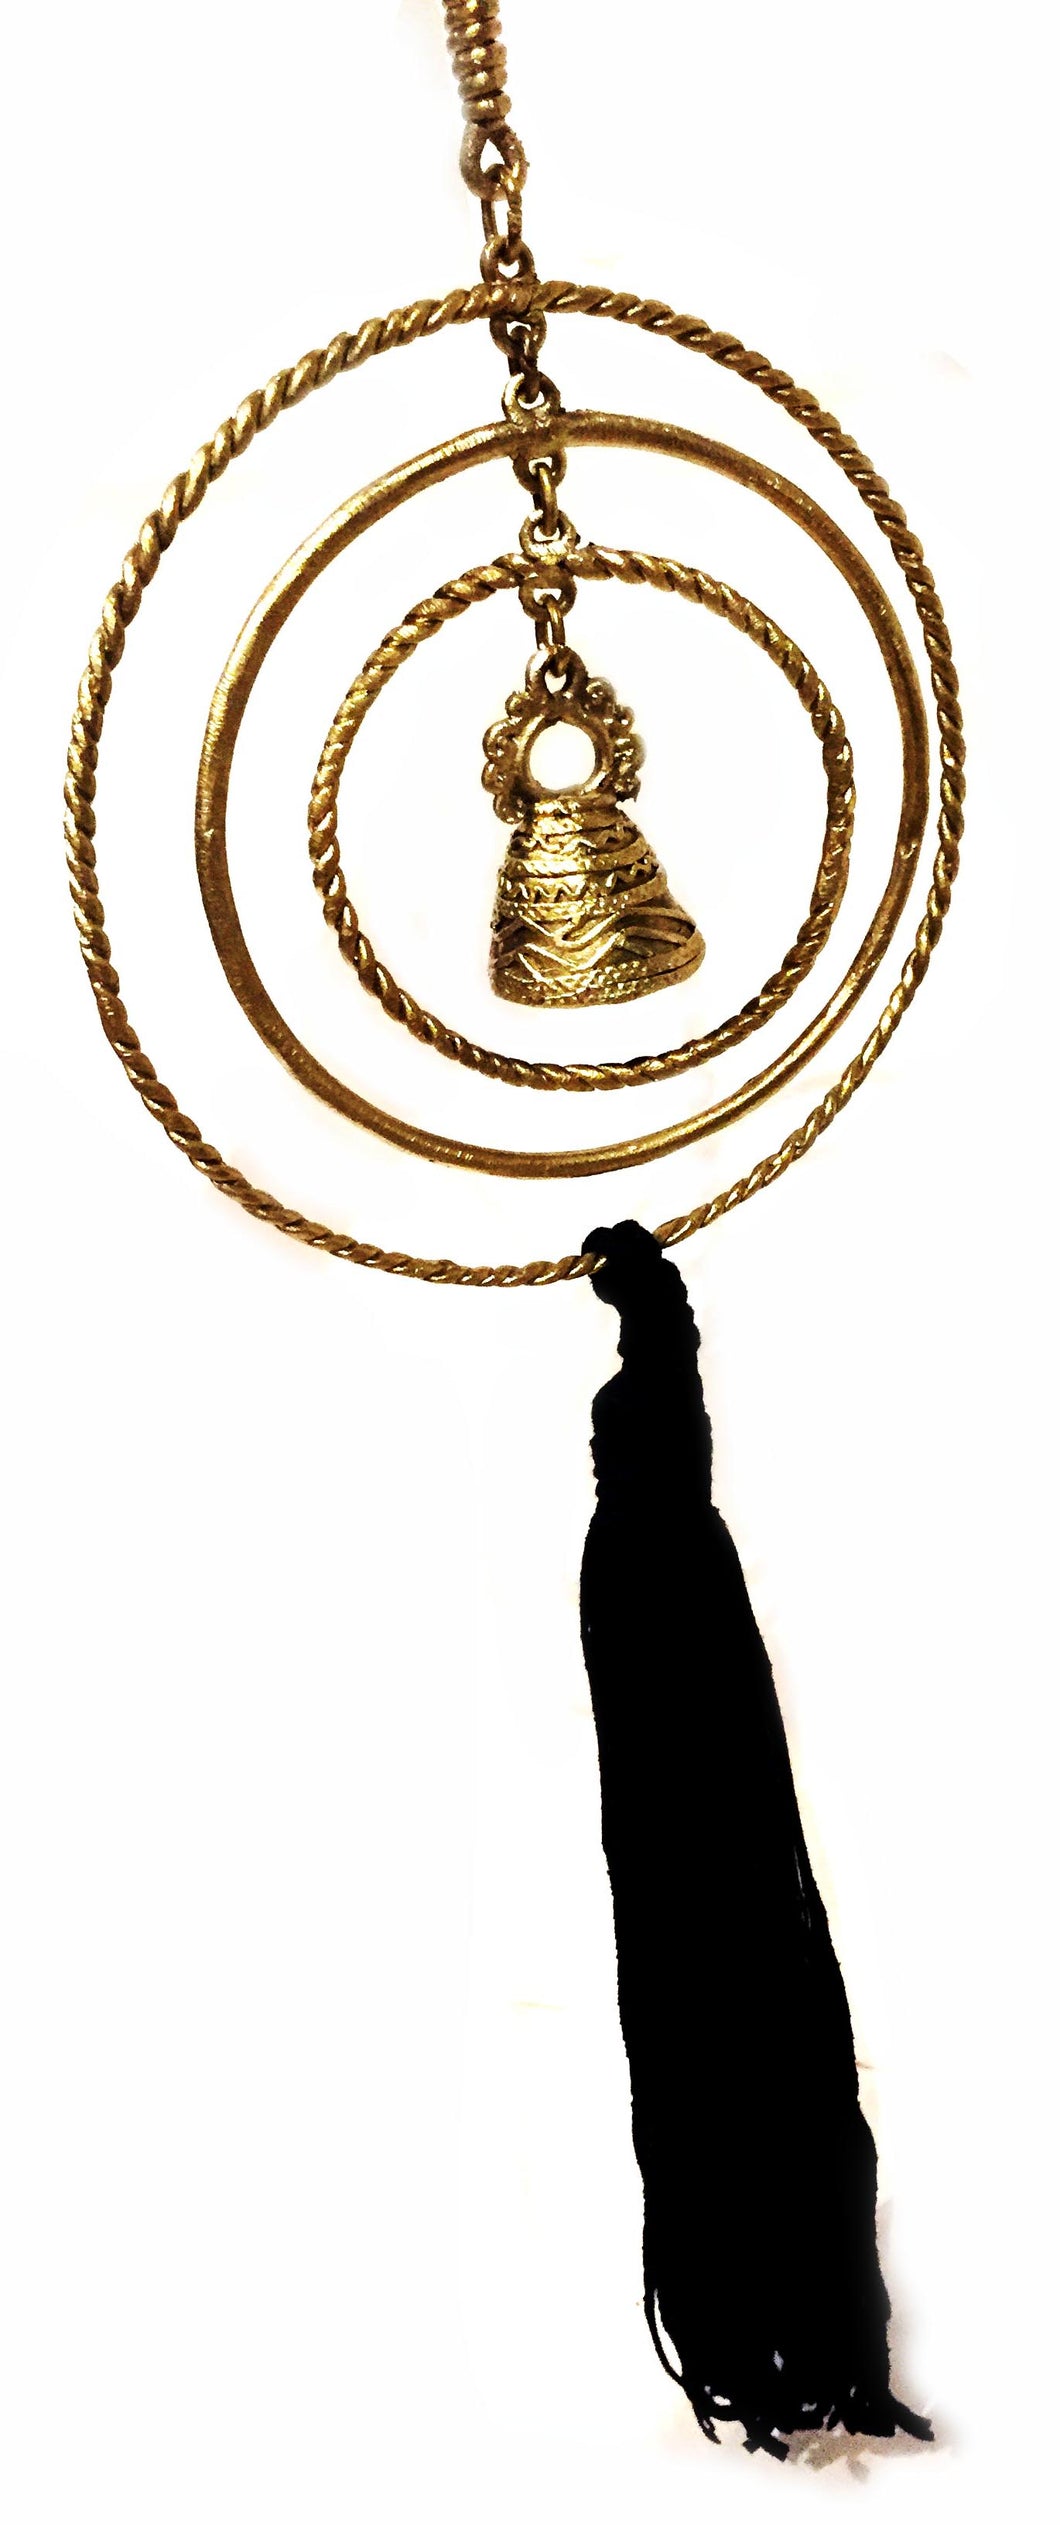 Round Bell Chime